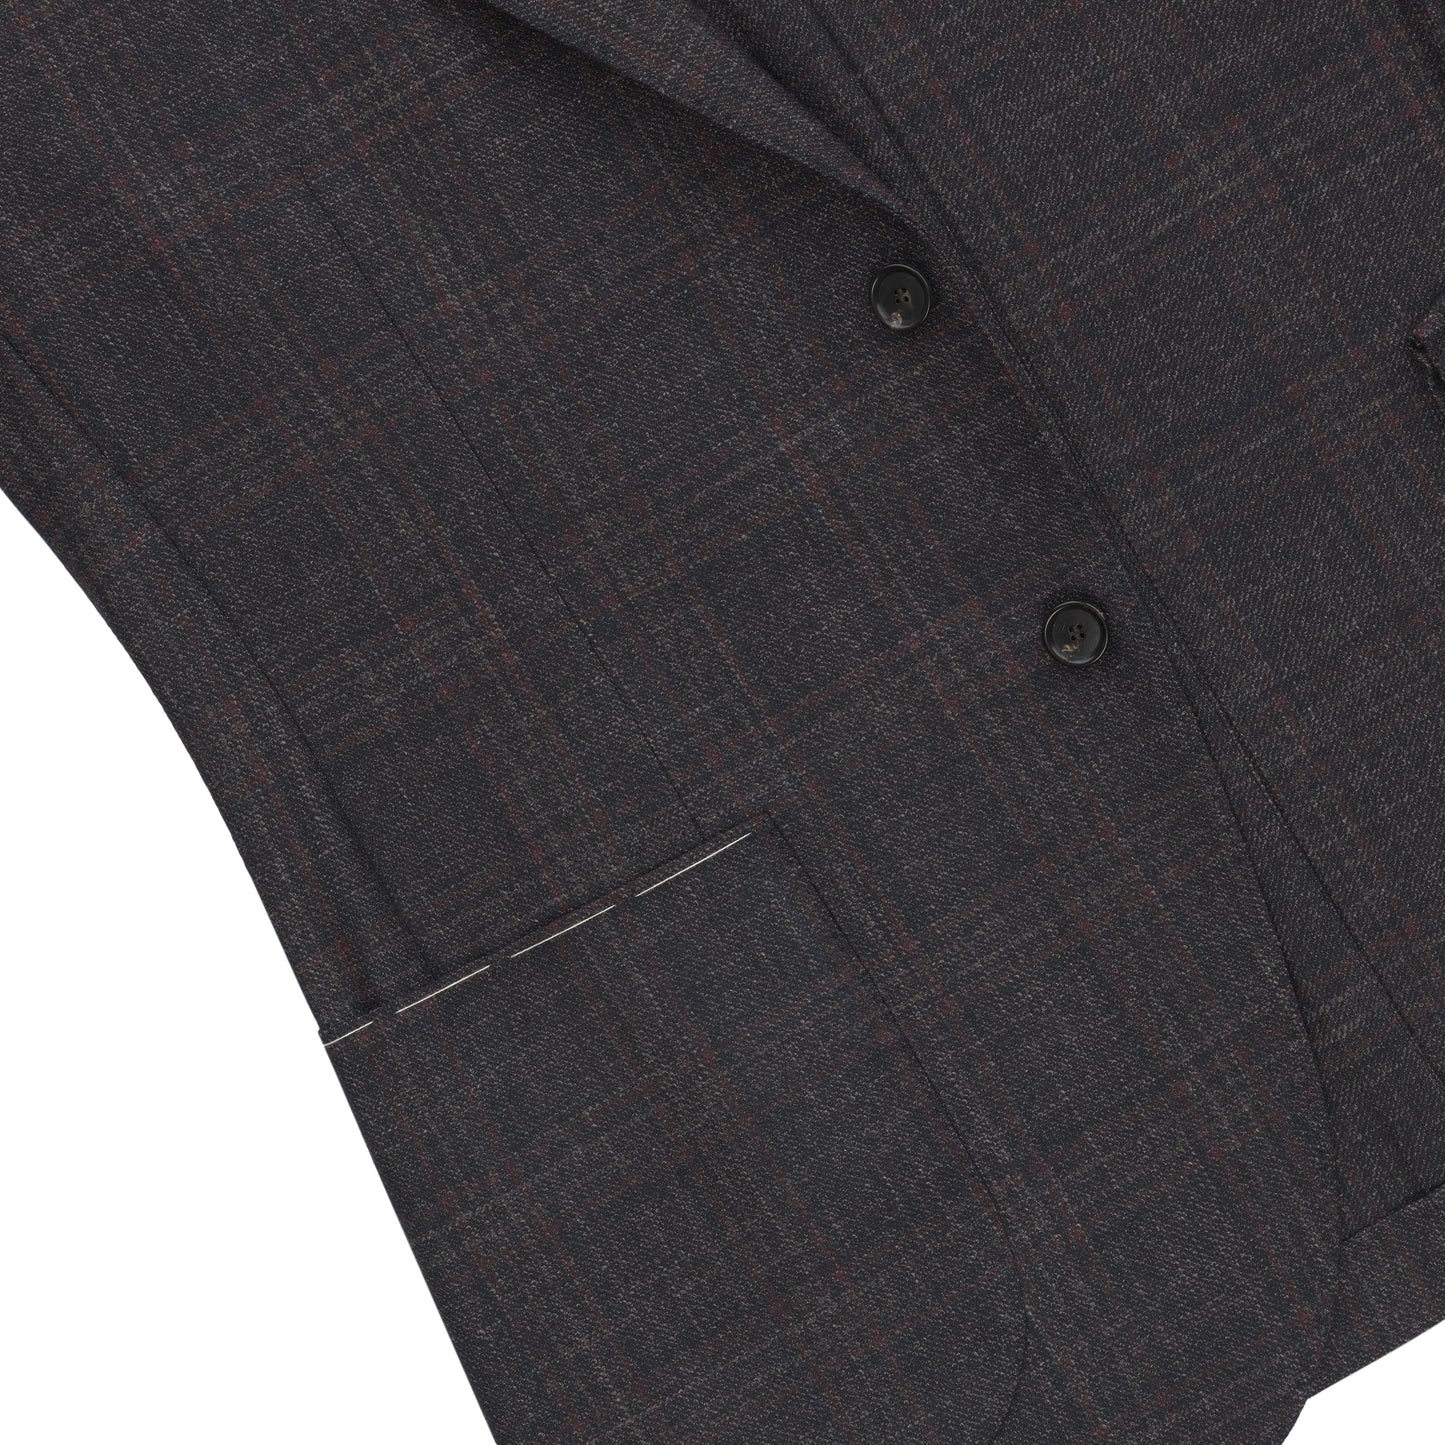 De Petrillo Single - Breasted Wool Jacket in Granite Brown and Red. Exclusively Made for Sartale - SARTALE